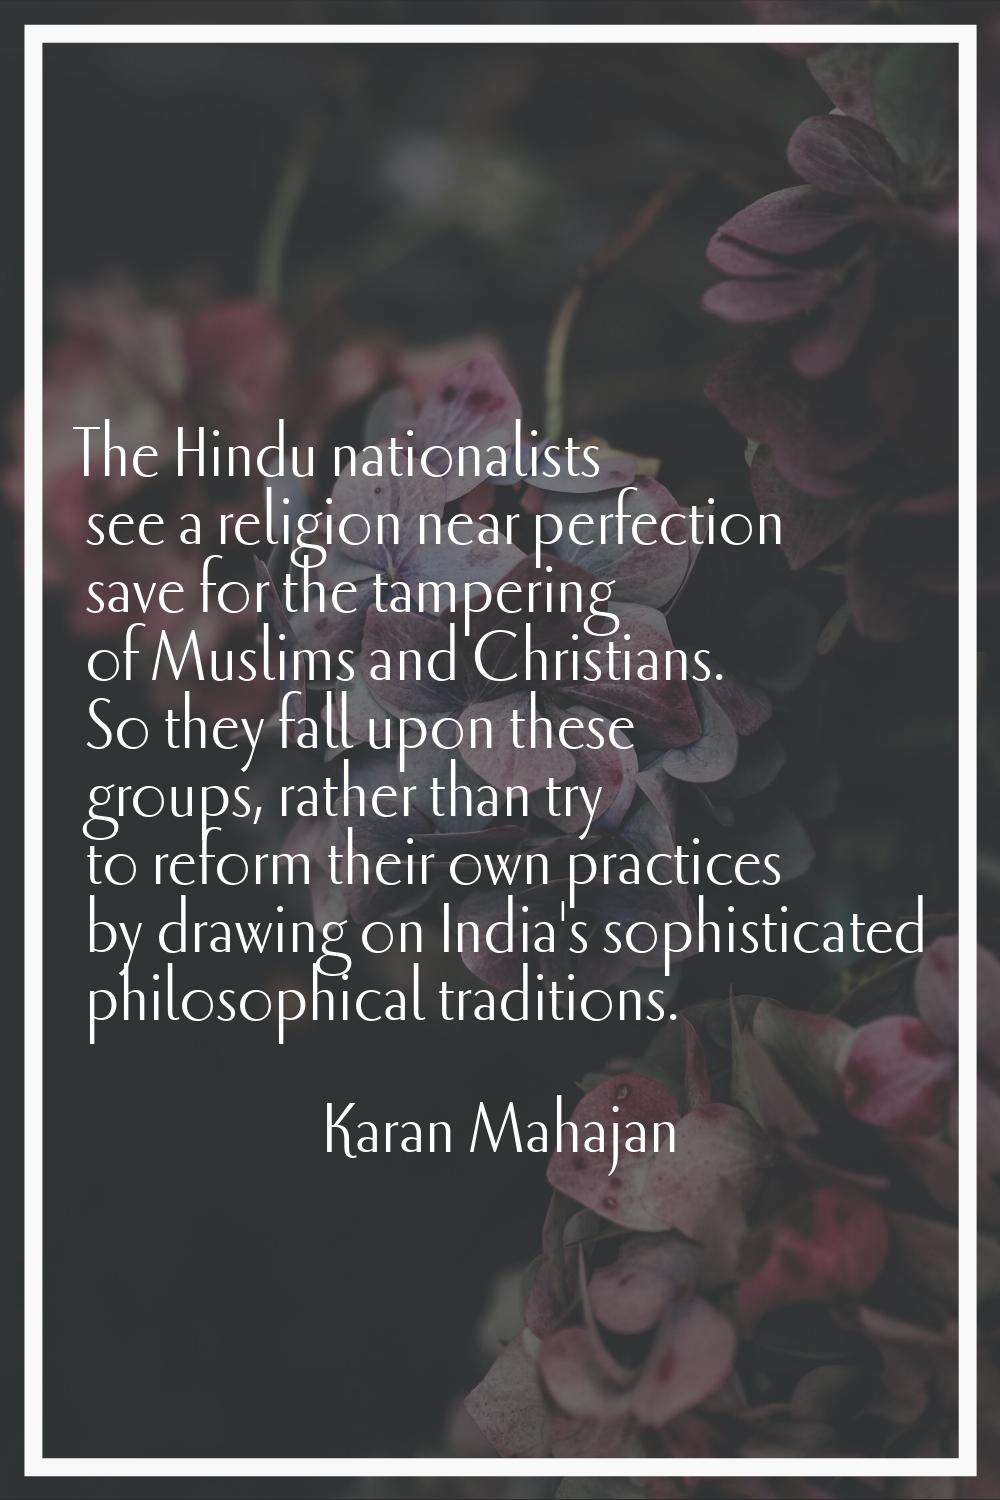 The Hindu nationalists see a religion near perfection save for the tampering of Muslims and Christi